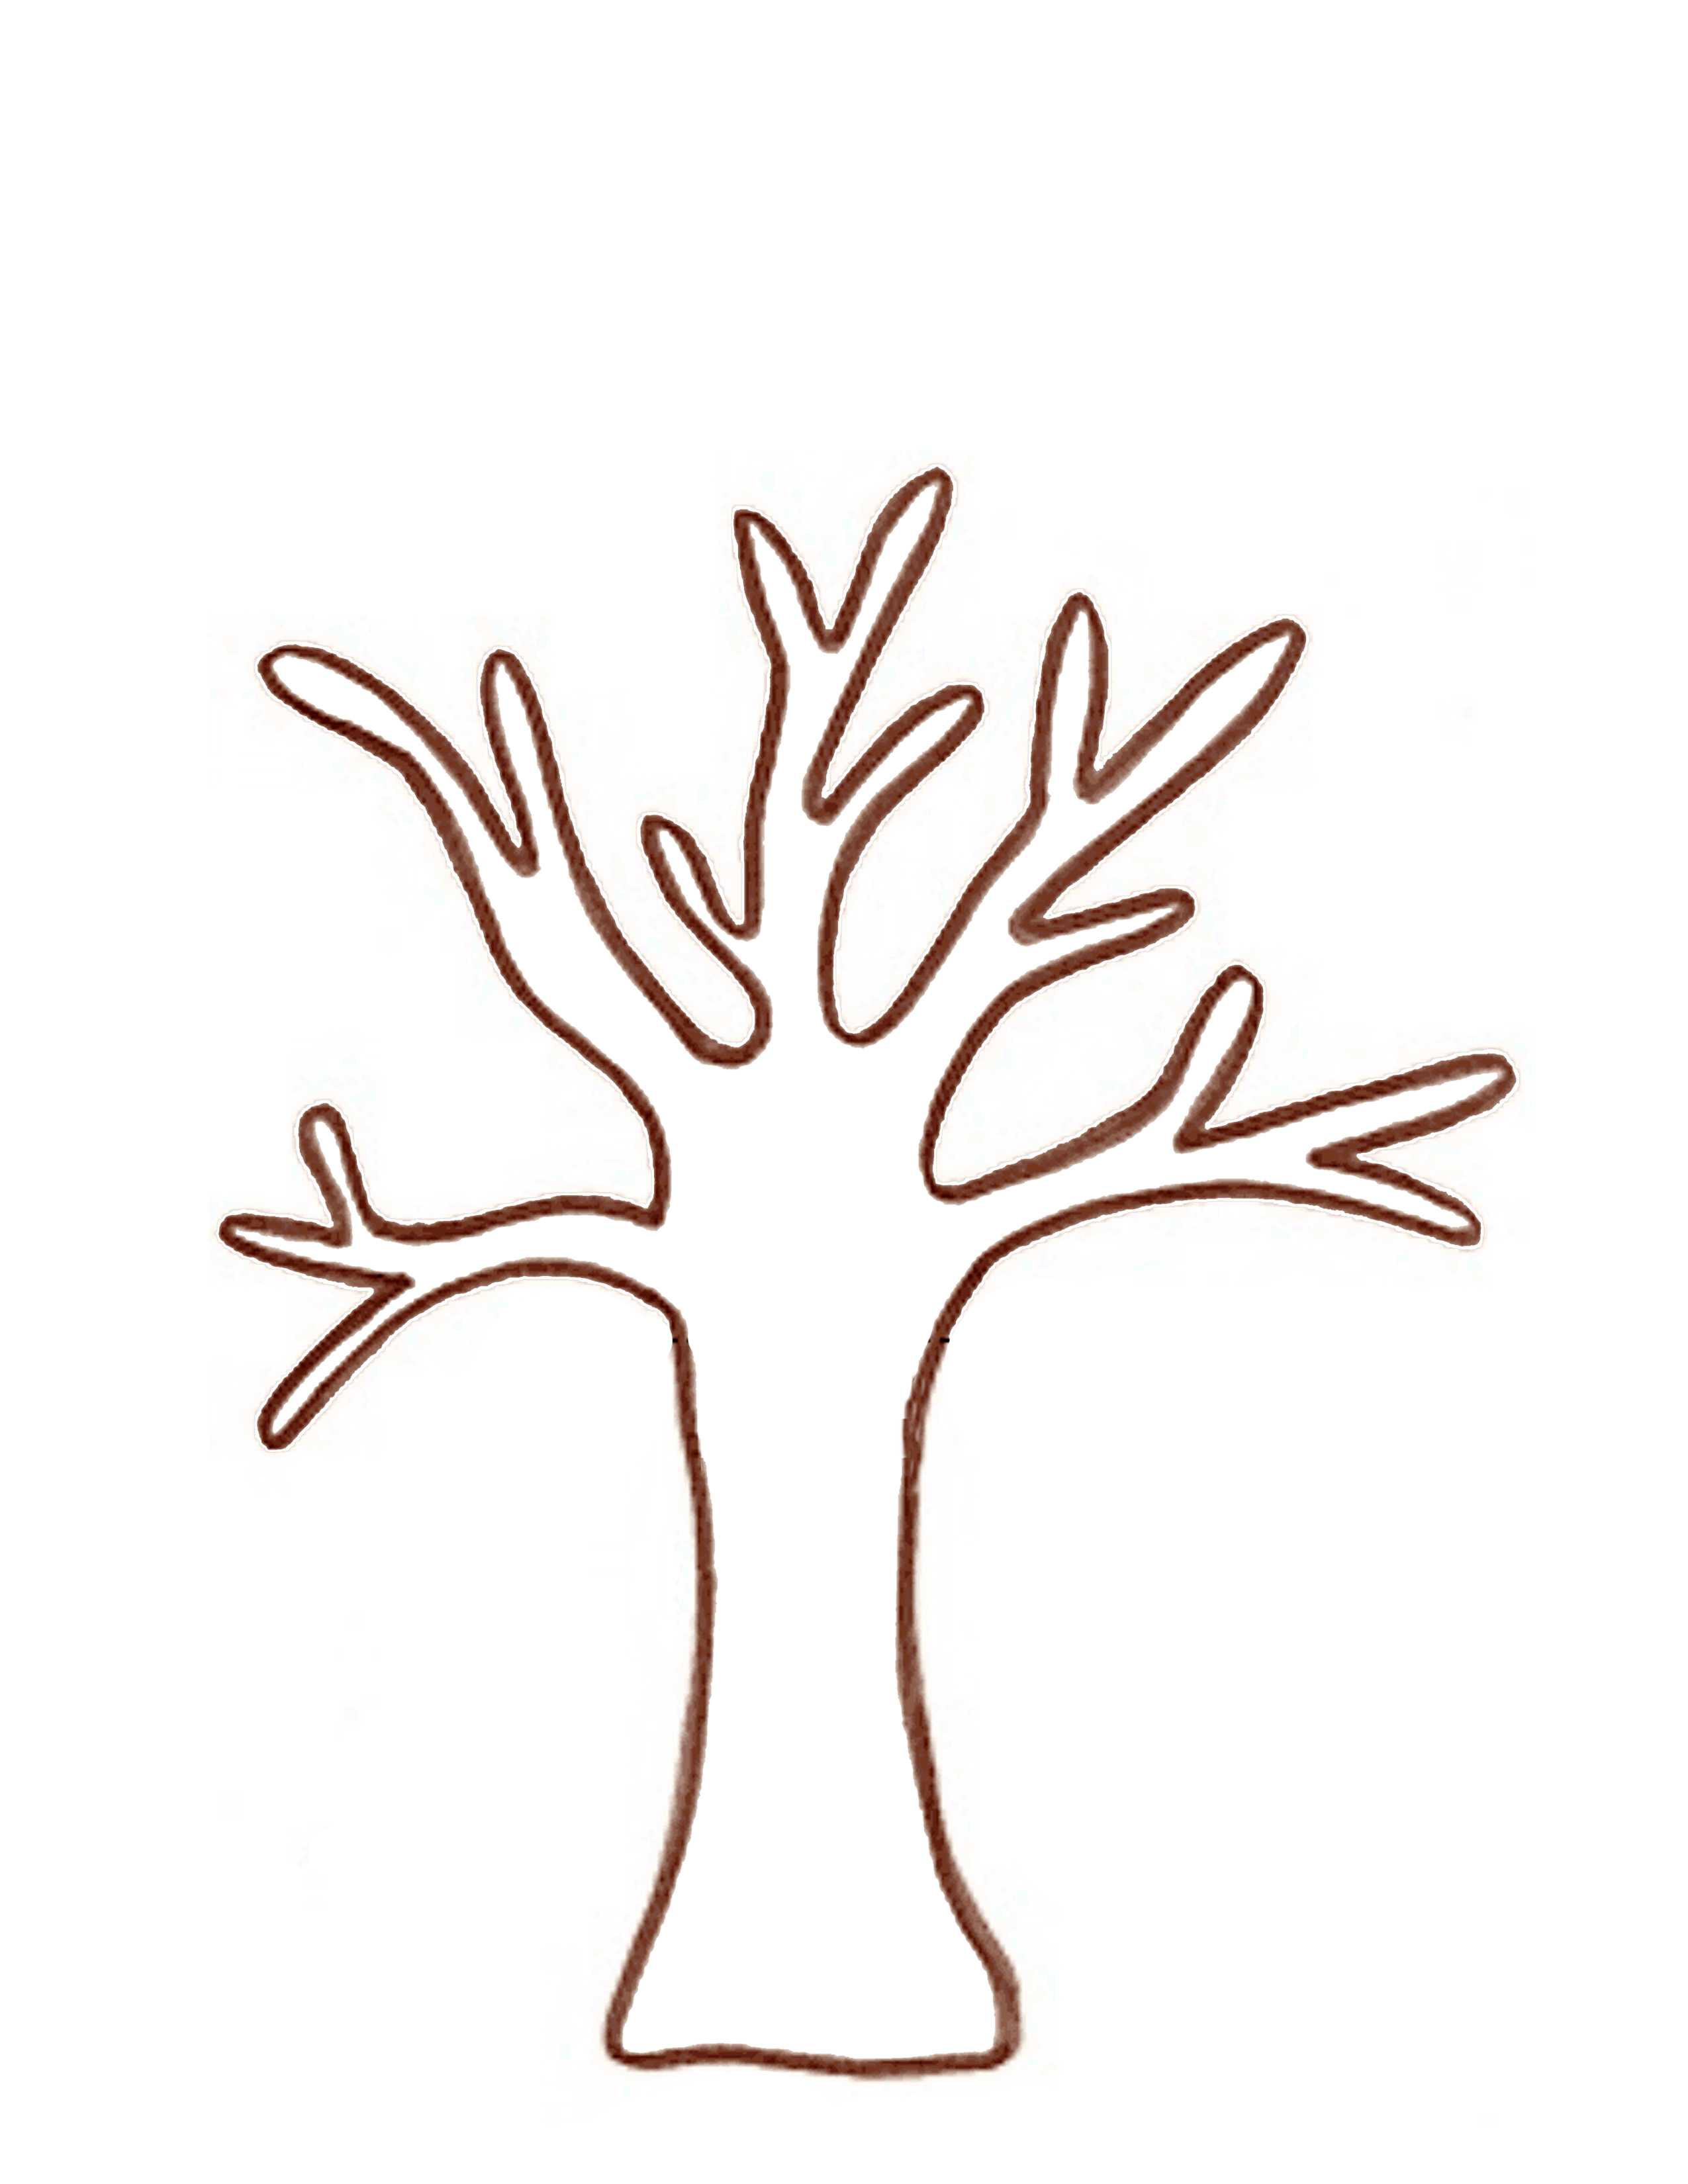 Best Photos of Tree Trunk Outline - Tree with Branches Clip Art ...